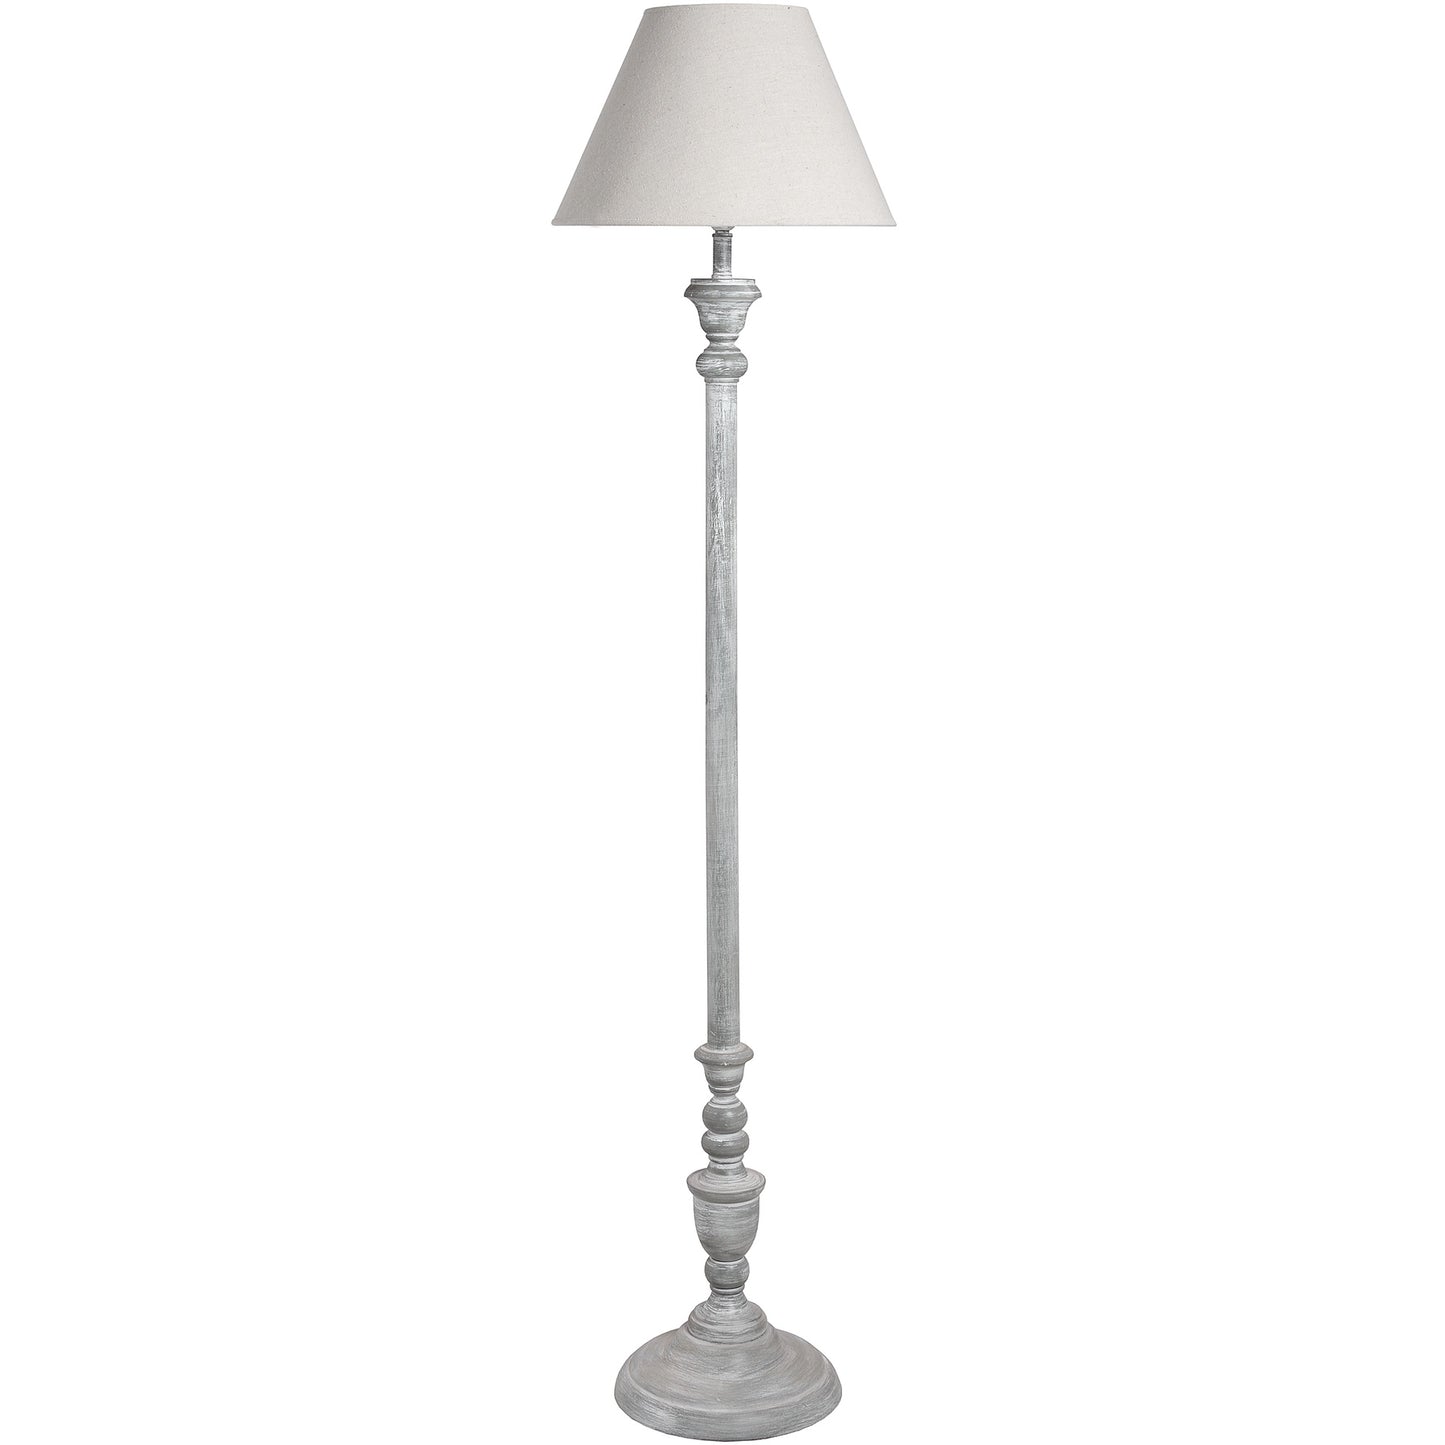 Distressed Grey Floor Lamp with Linen Shade